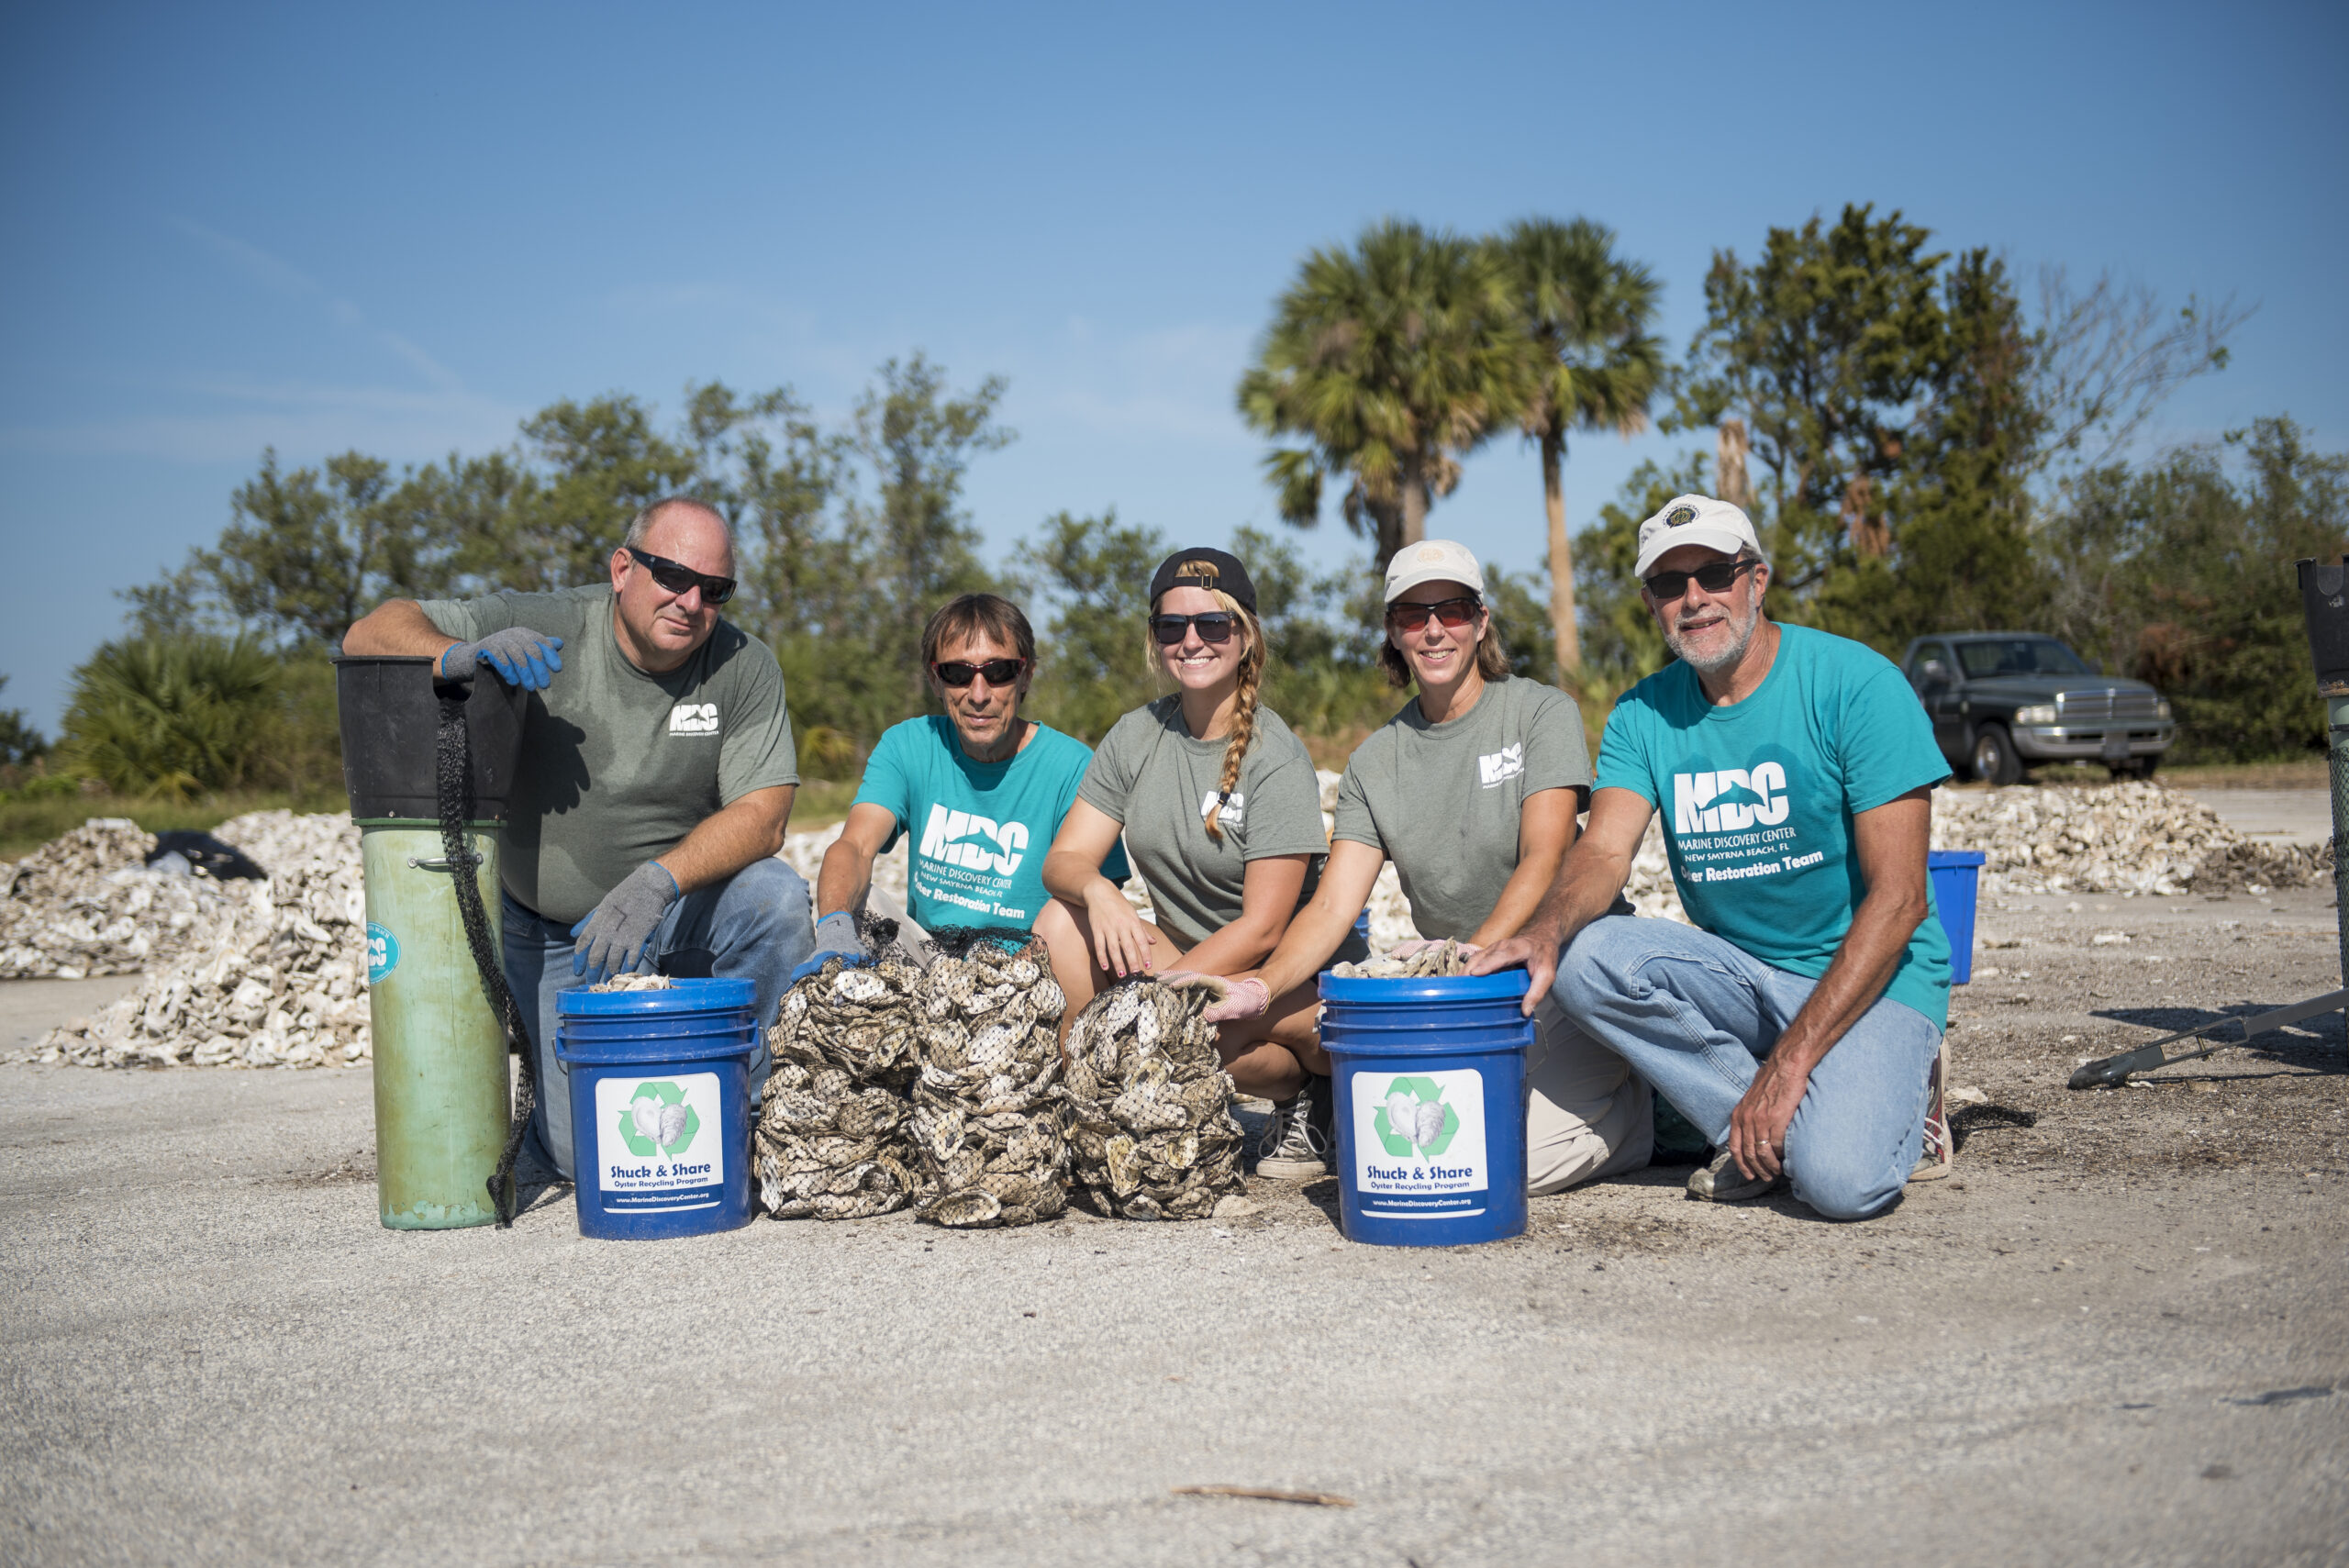 Shuck and Share Volunteers